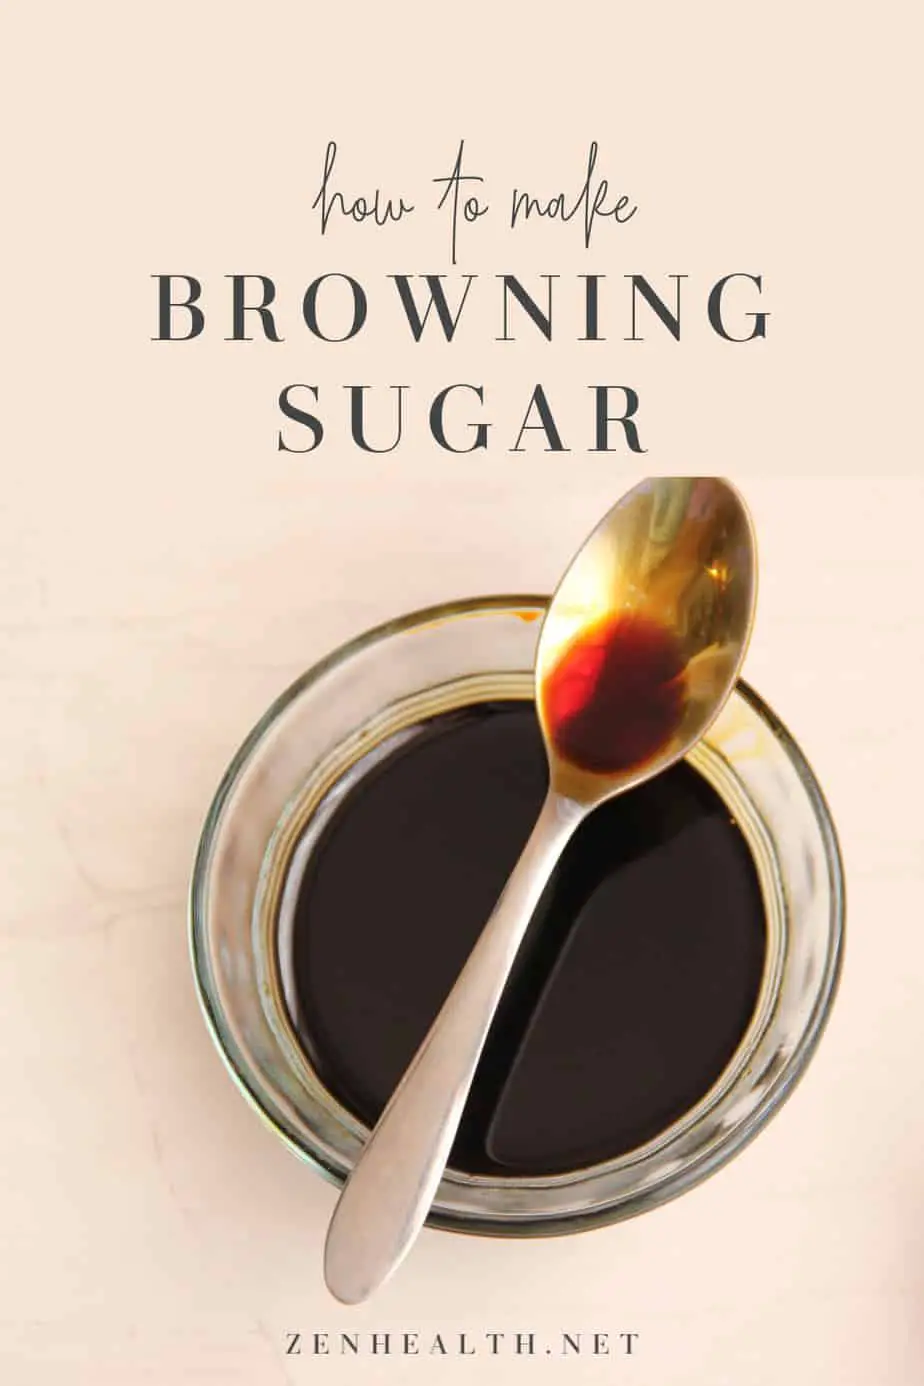 Browning Sugar: Follow These Easy Steps